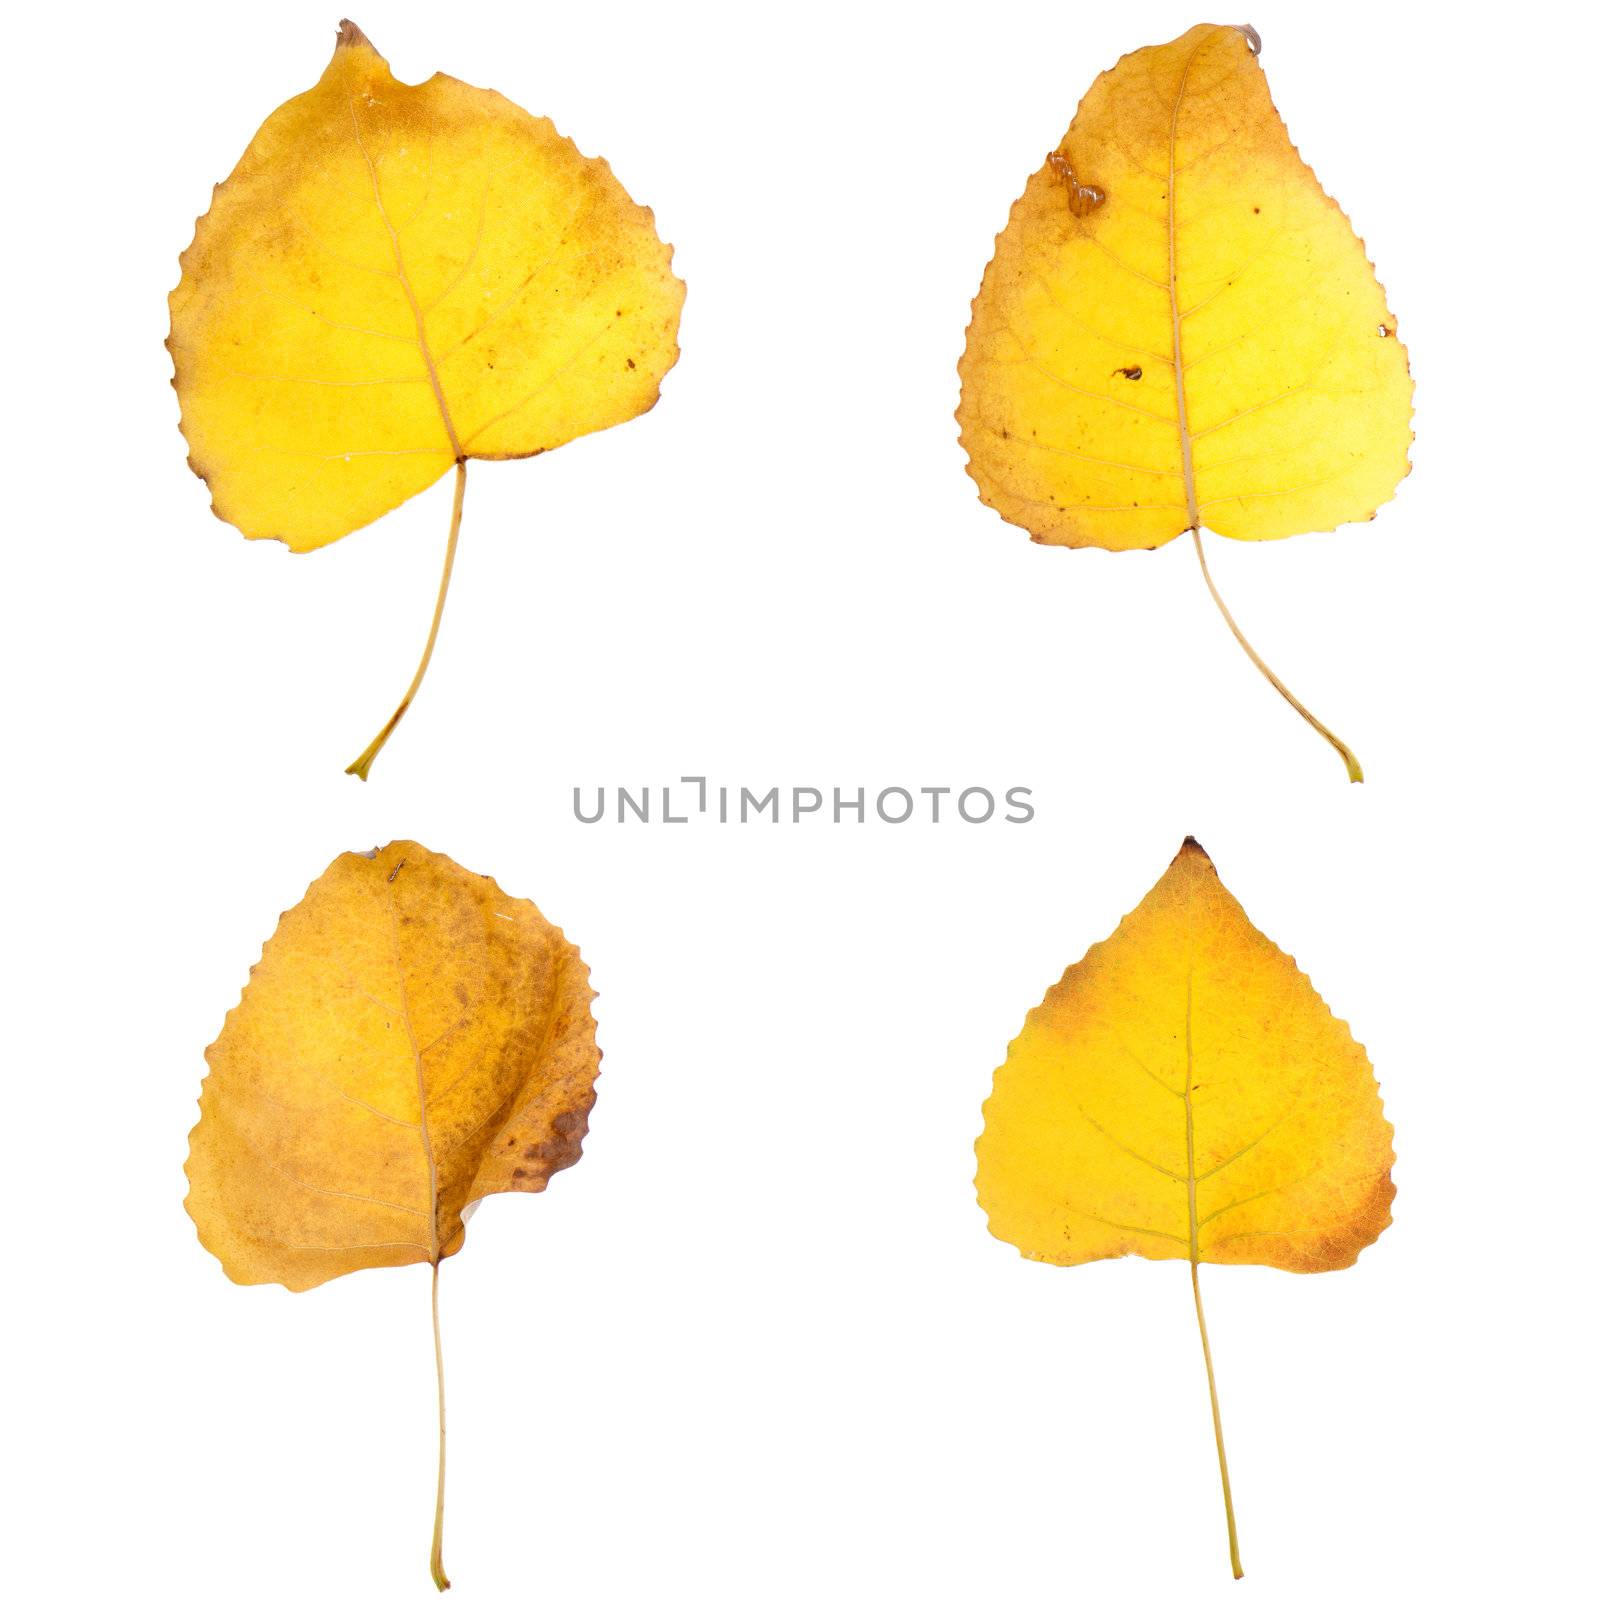 Four fall leaves isolated on white background.